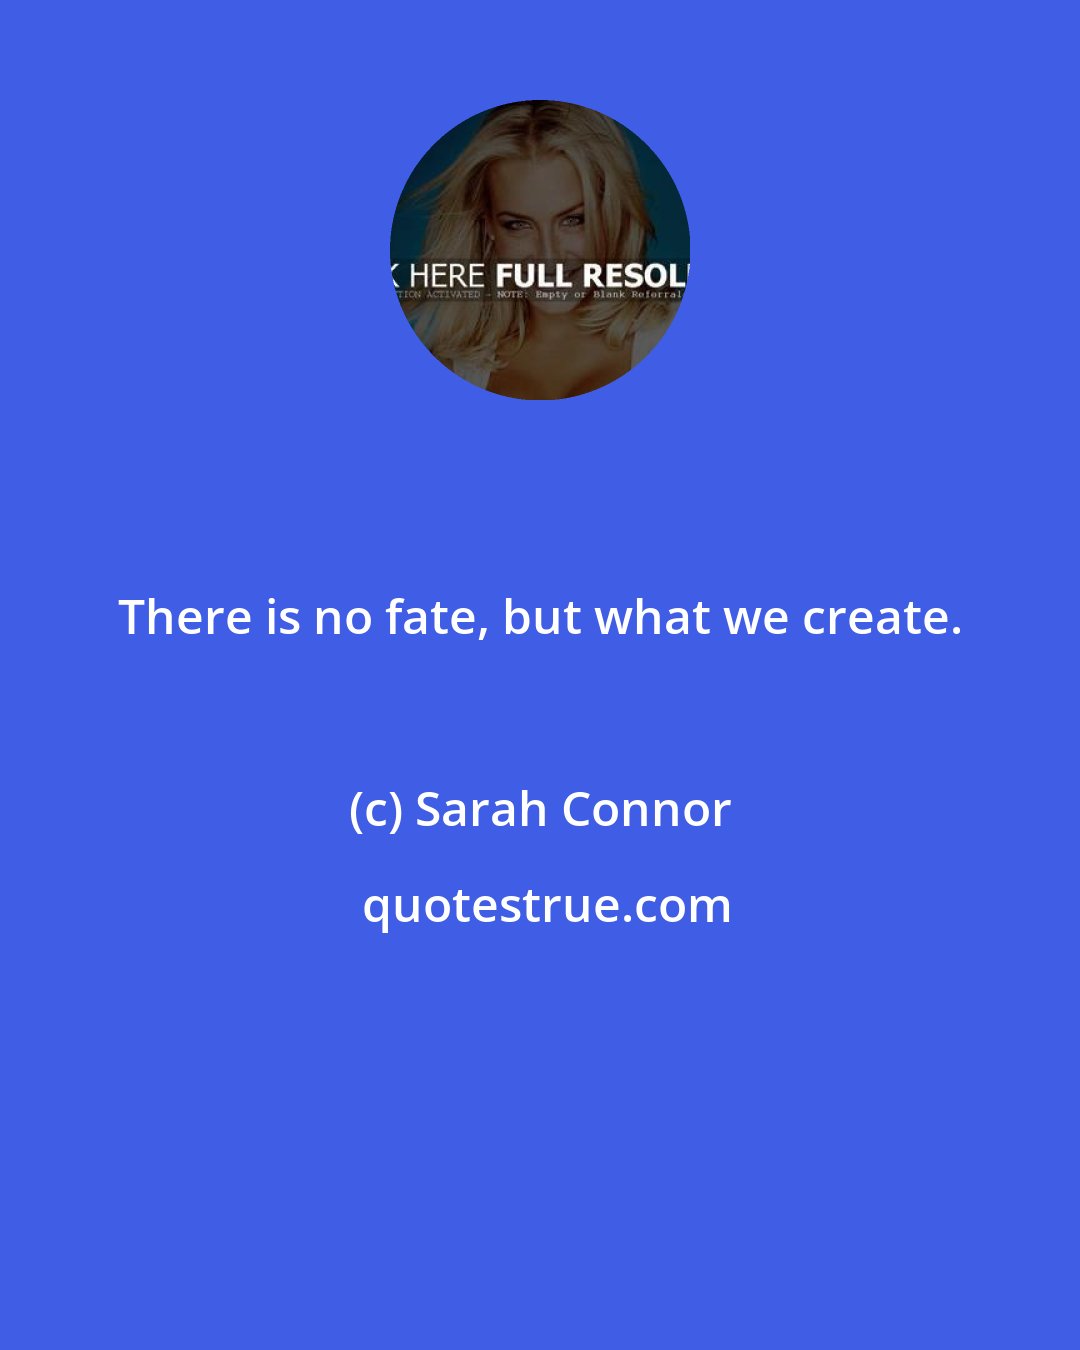 Sarah Connor: There is no fate, but what we create.